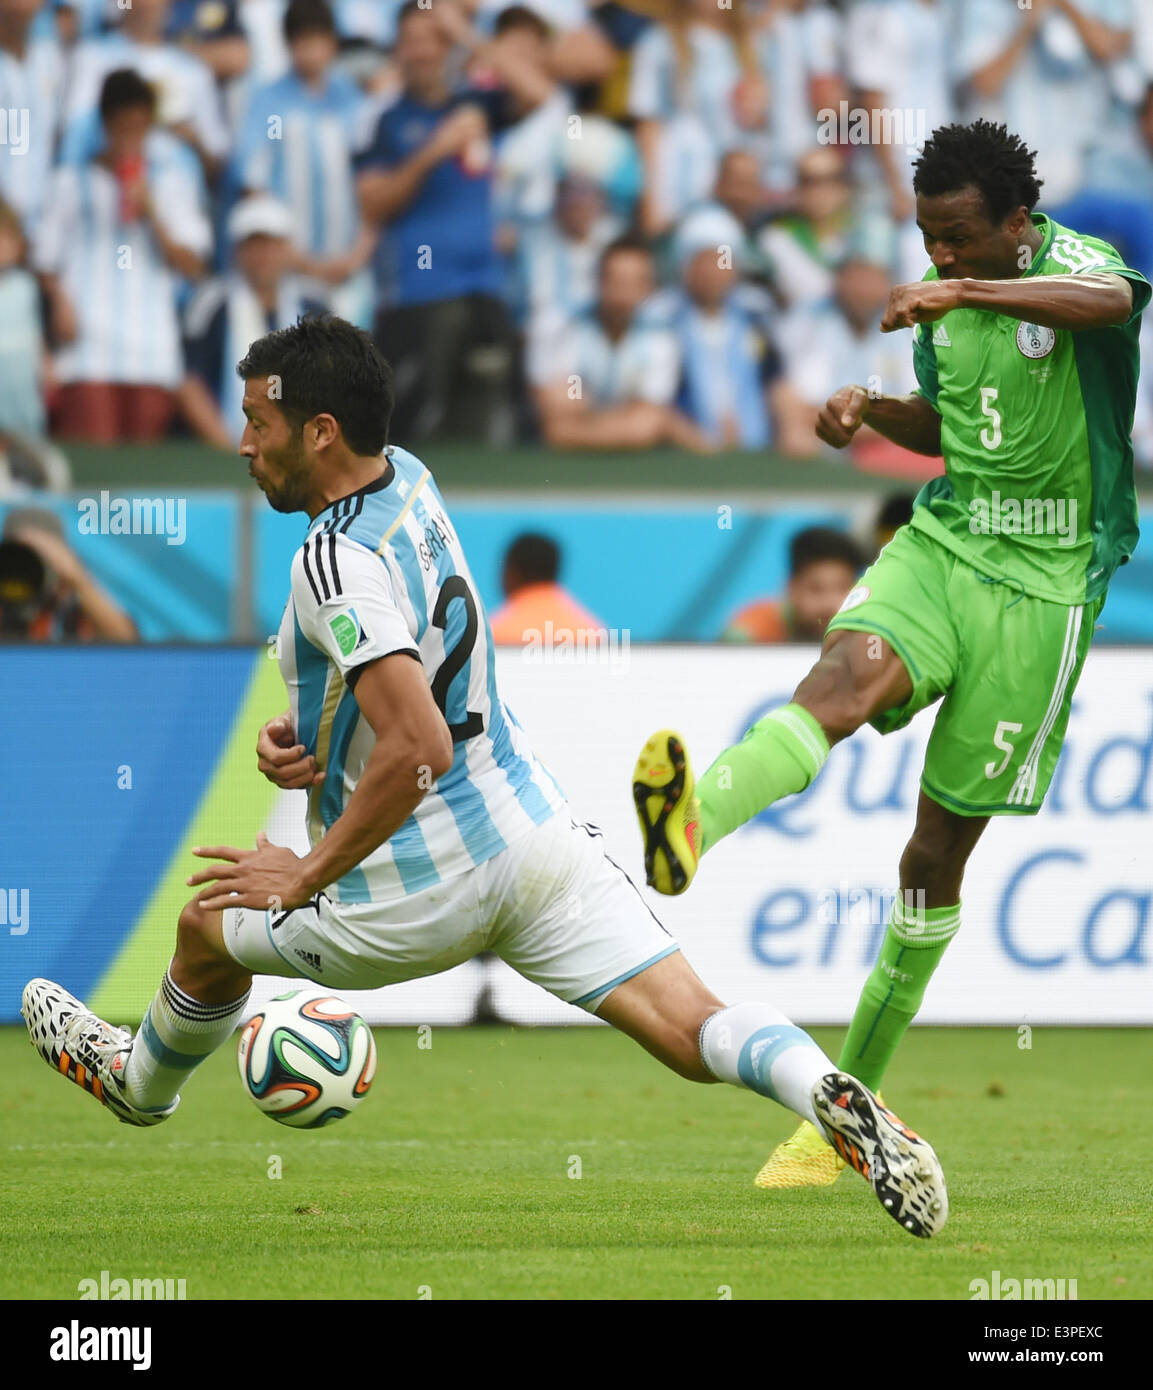 Porto Alegre, Brazil. 25th June, 2014. Argentina's Ezequiel Garay (L) attempts to block a shot by Nigeria's Efe Ambrose during a Group F match between Nigeria and Argentina of 2014 FIFA World Cup at the Estadio Beira-Rio Stadium in Porto Alegre, Brazil, on June 25, 2014. Argentina won 3-2 over Nigeria on Wednesday. © Li Ga/Xinhua/Alamy Live News Stock Photo